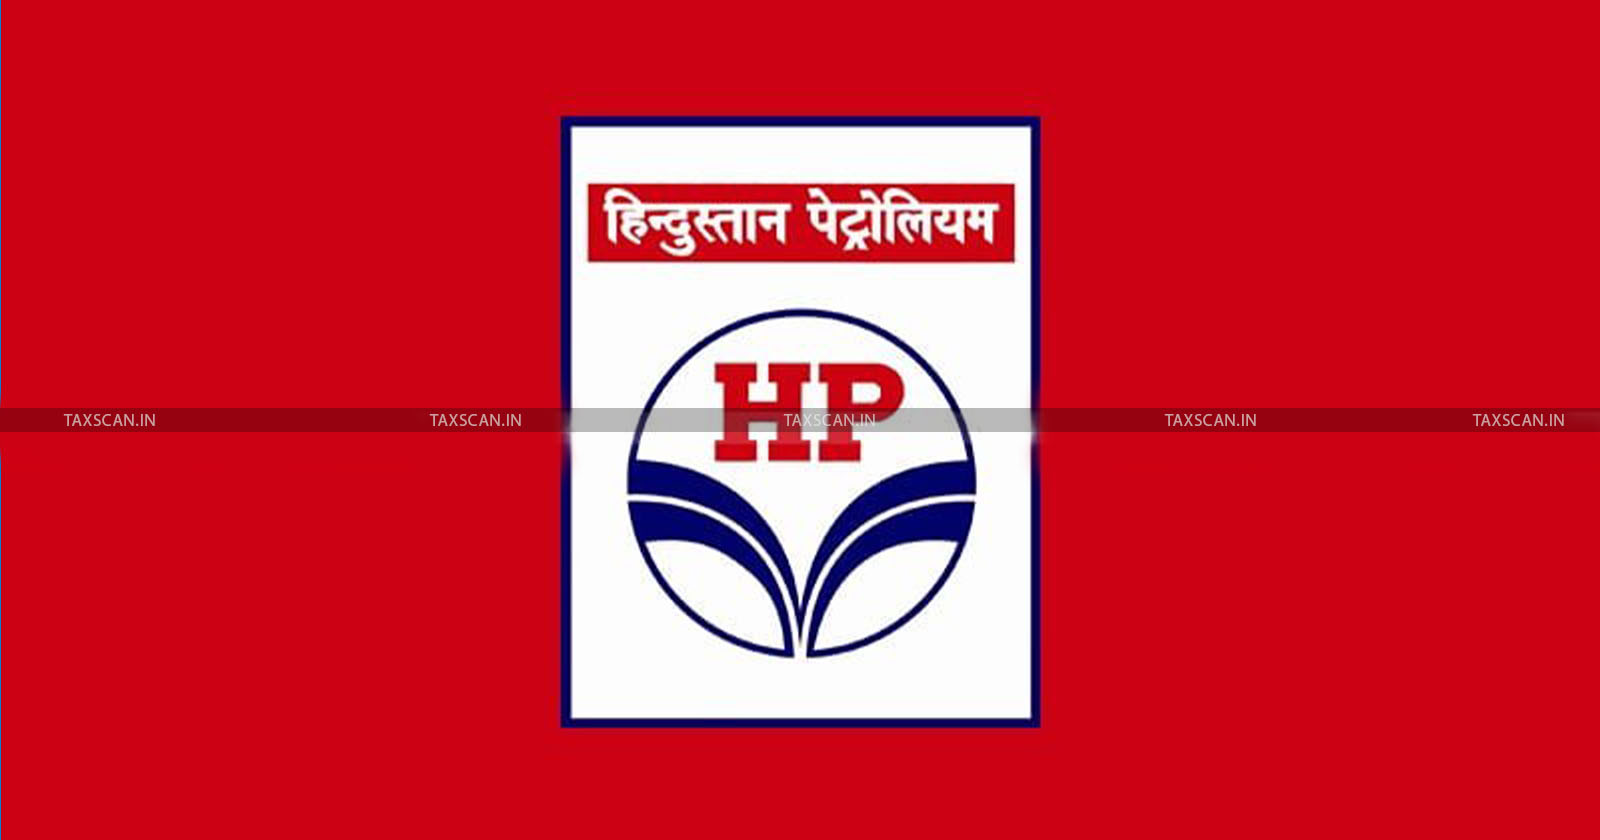 HPCL - Excise - Duty - Demand - Customs - Appellate - Tribunal - Excise - Service - Tax - TAXSCAN